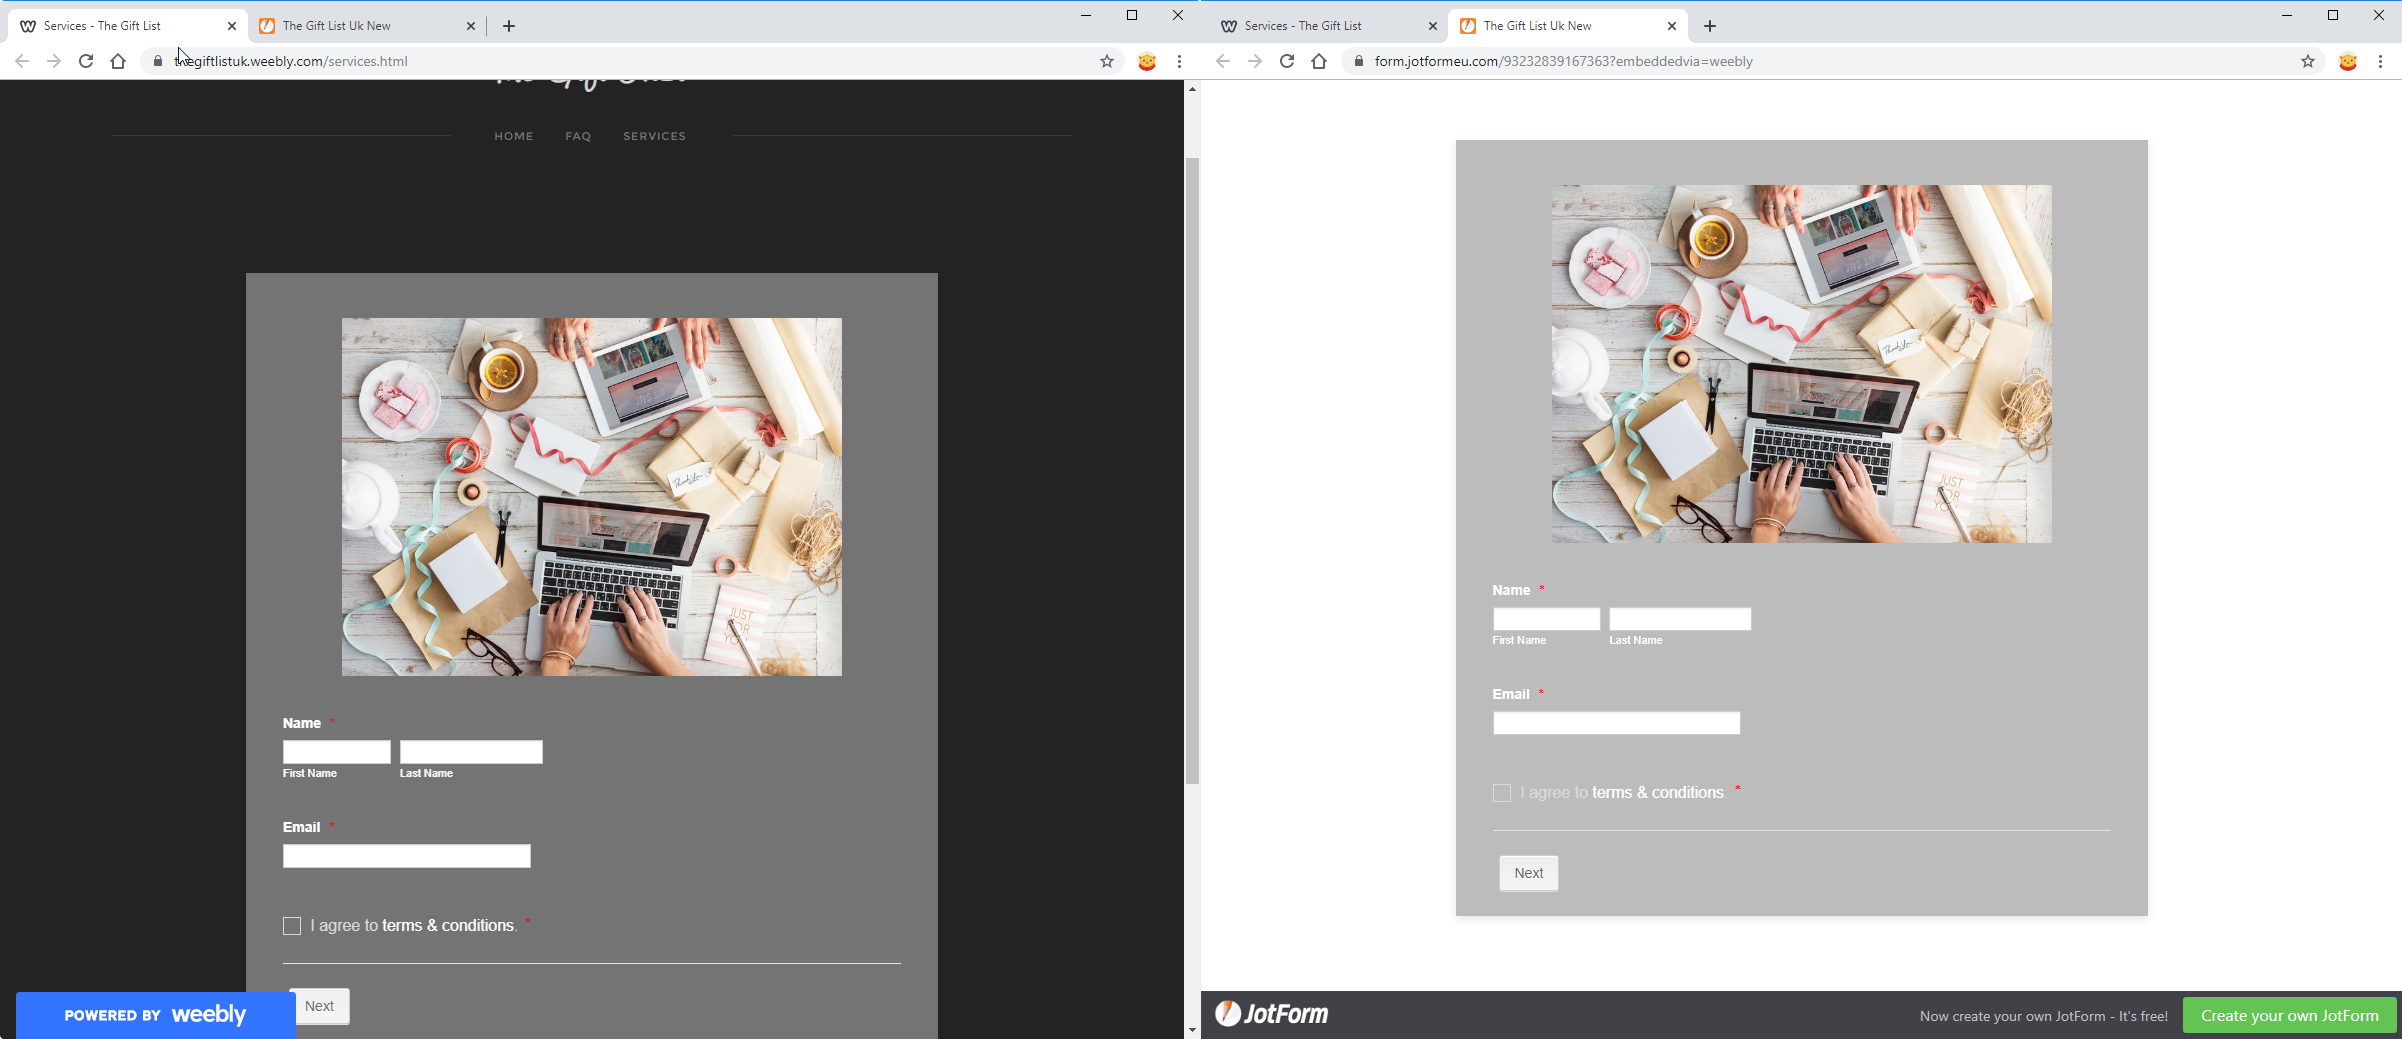 Form is different on my Weebly site Image 1 Screenshot 20